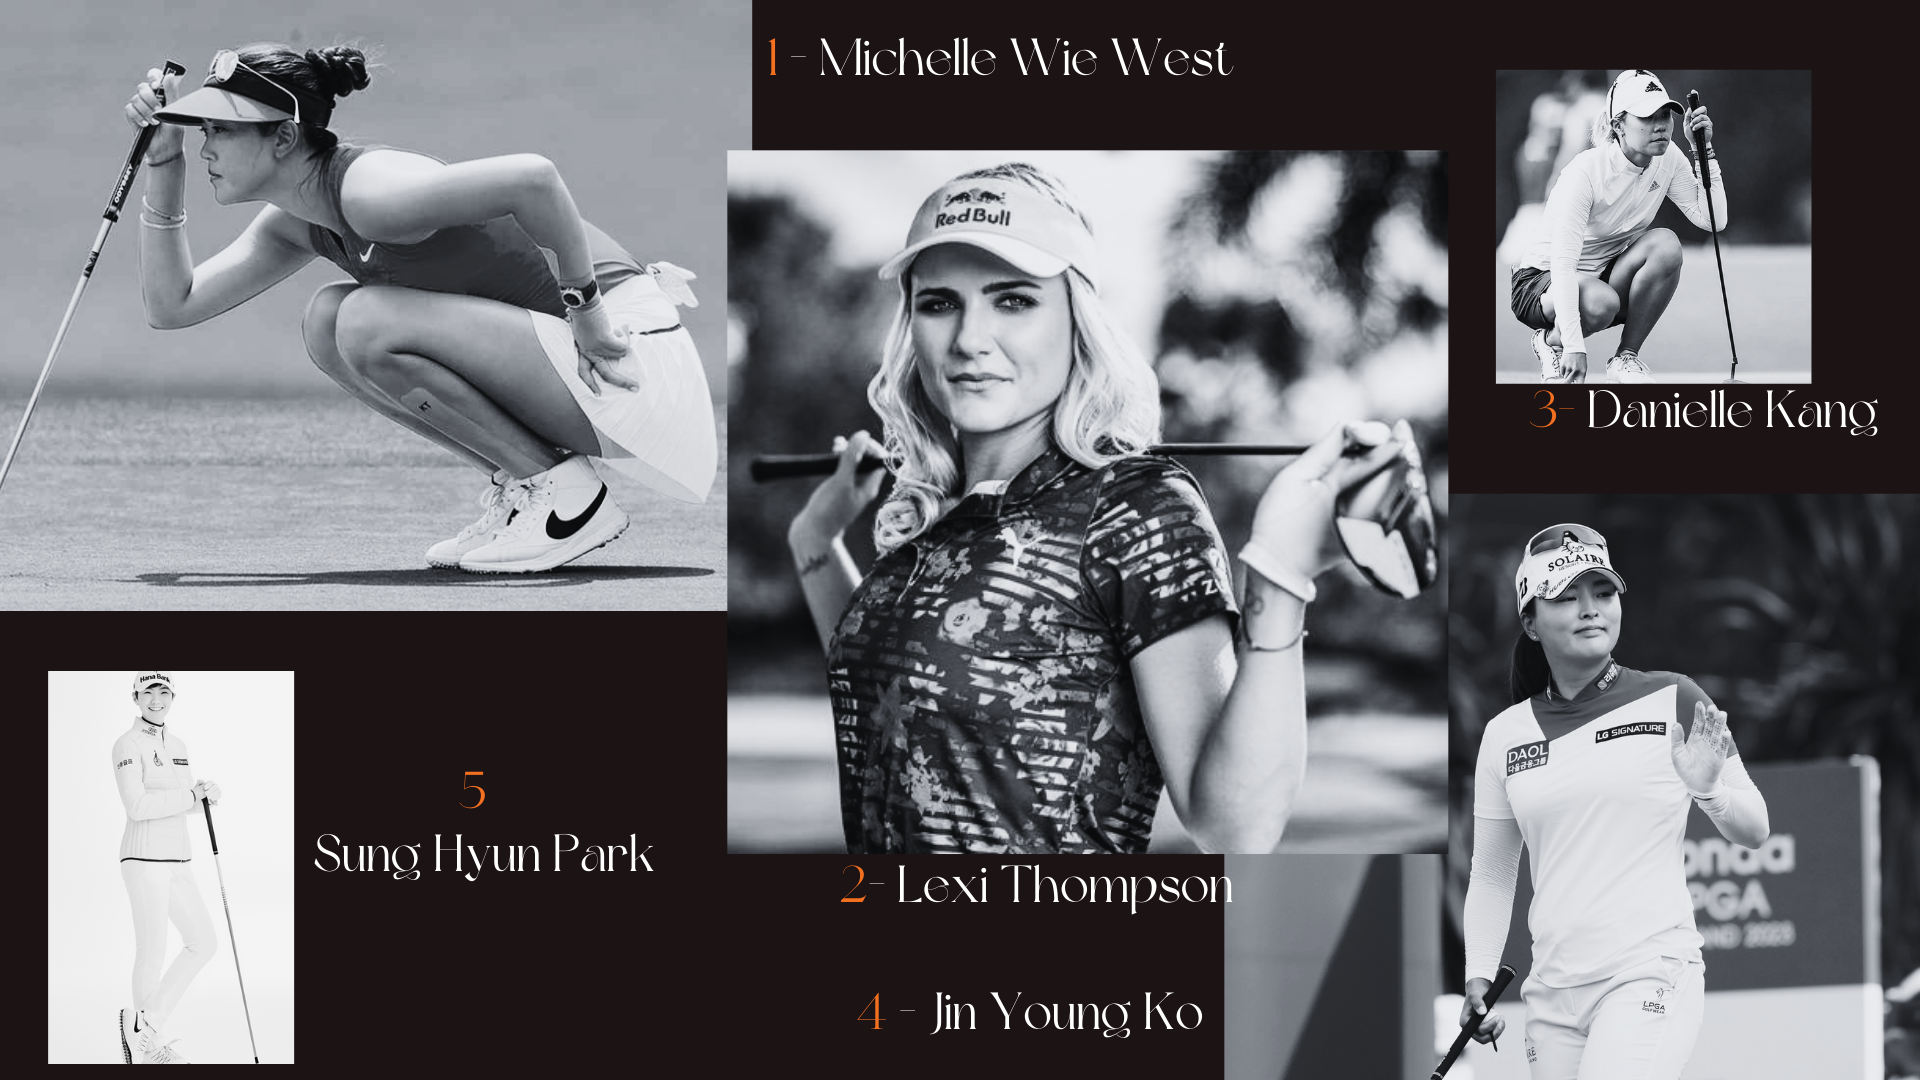 Five LPGA players showcasing their distinct golf fashion styles on the course. Each athlete displays a unique blend of traditional and modern golf attire, reflecting the evolving trends in women's golf fashion.